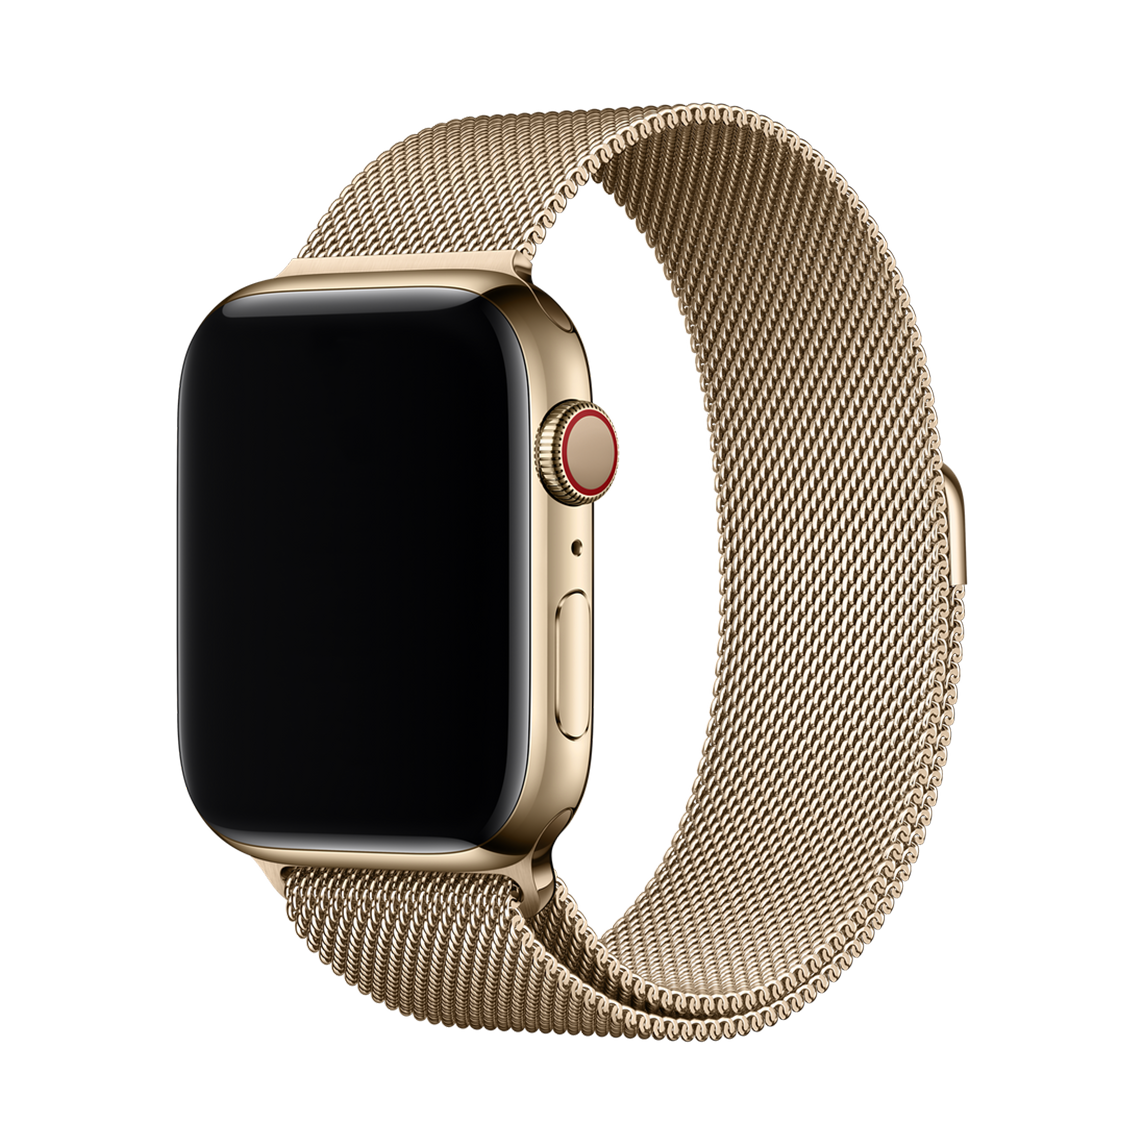 apple-watch-series-6-graphite-stainless-steel-case-with-milanese-loop